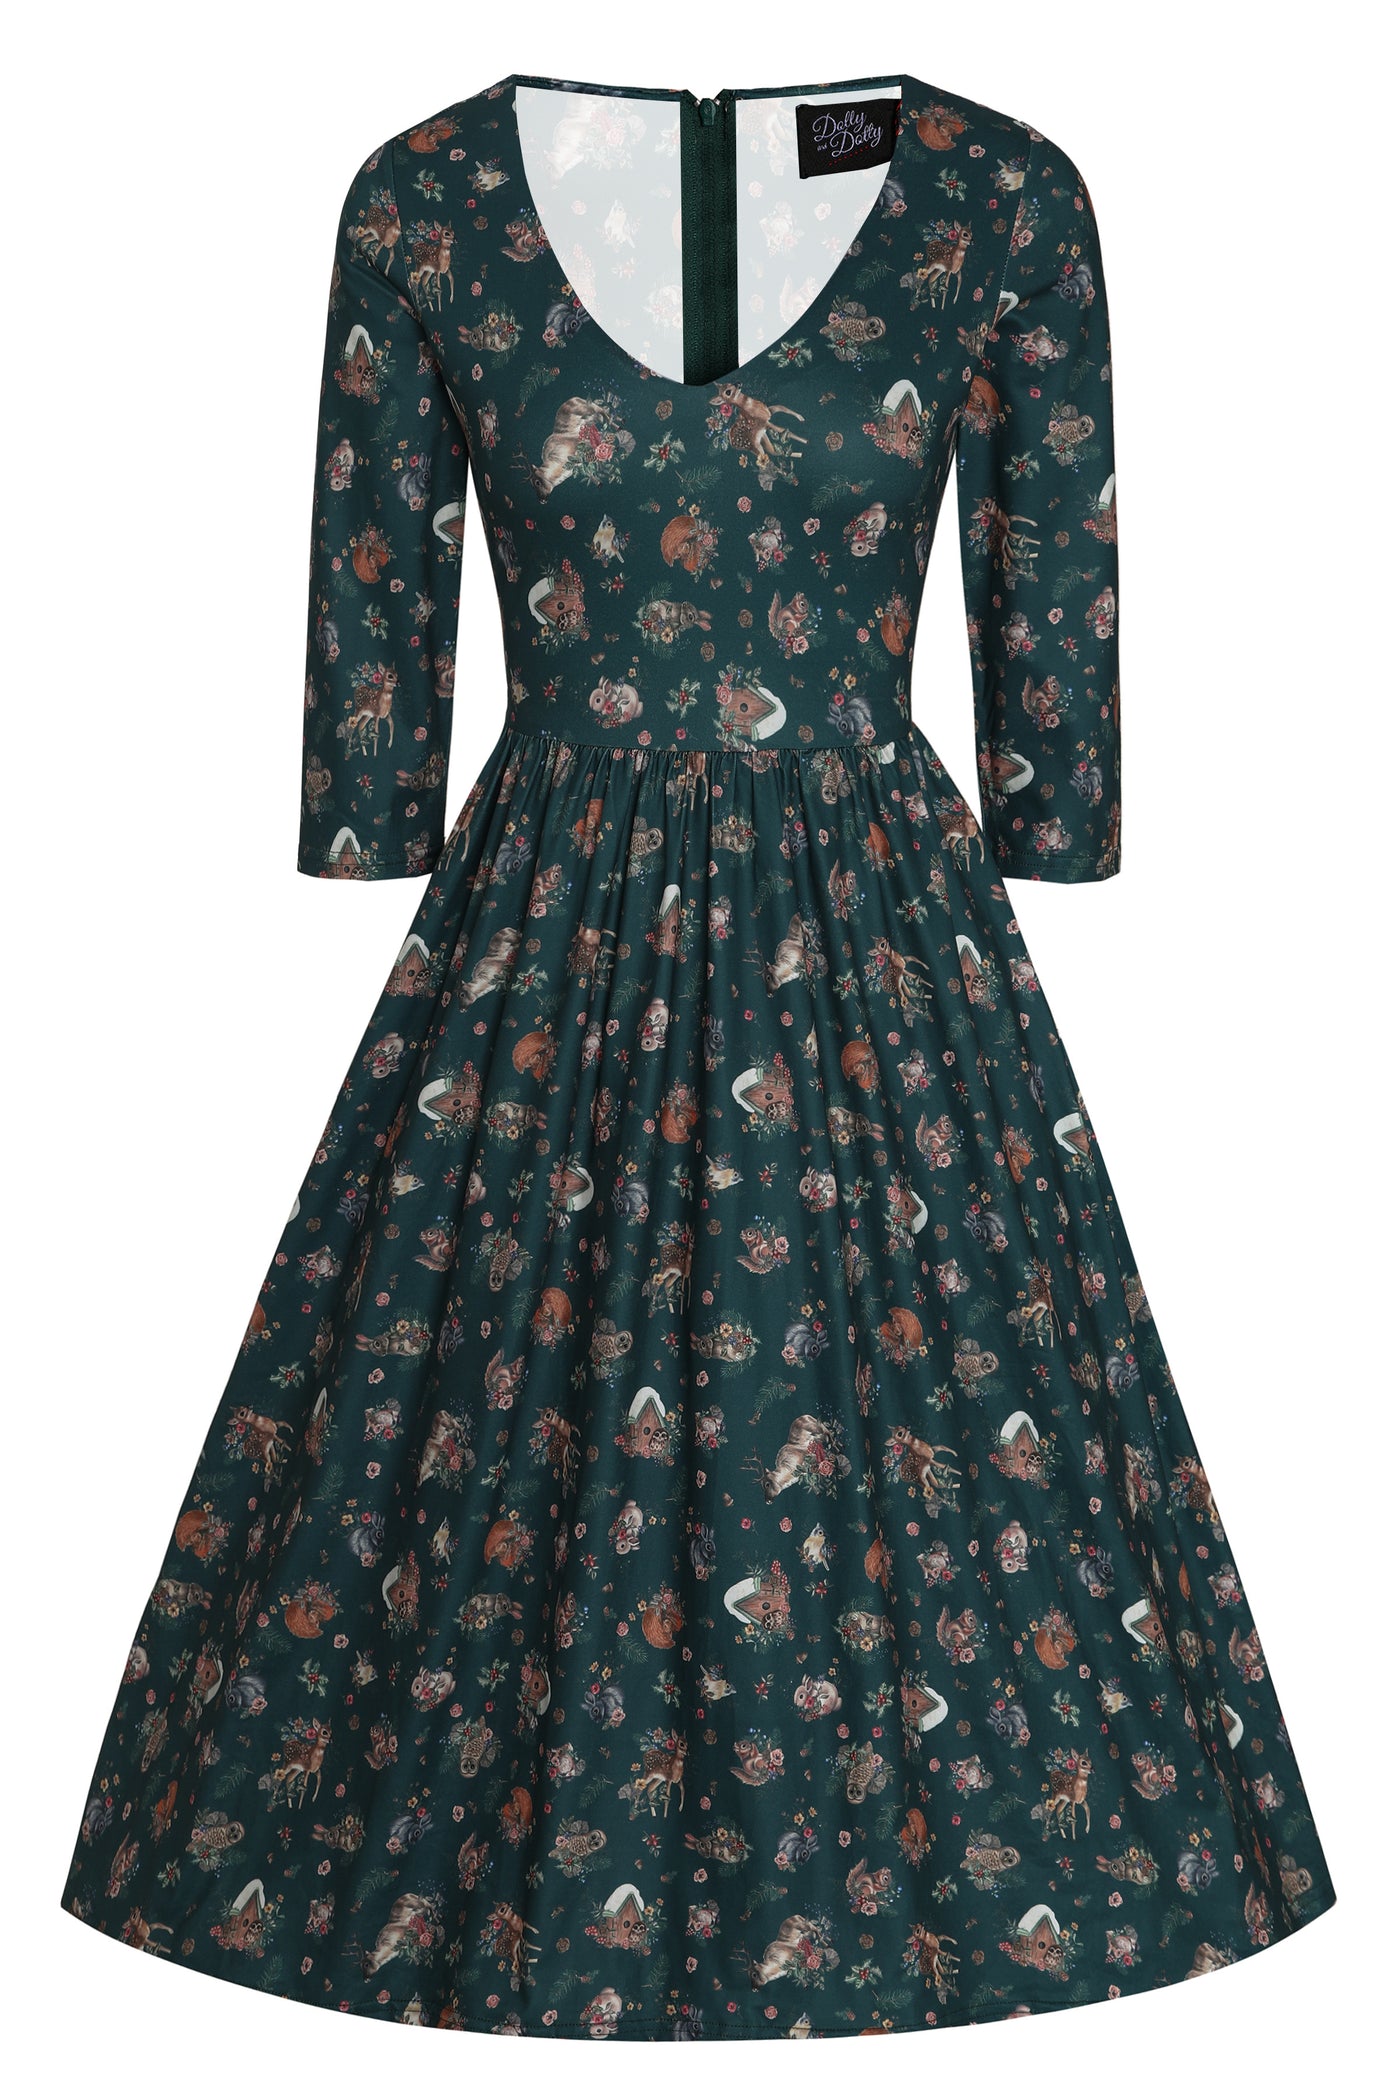 Front view of our dark green, long sleeved flared dress, with a woodland print